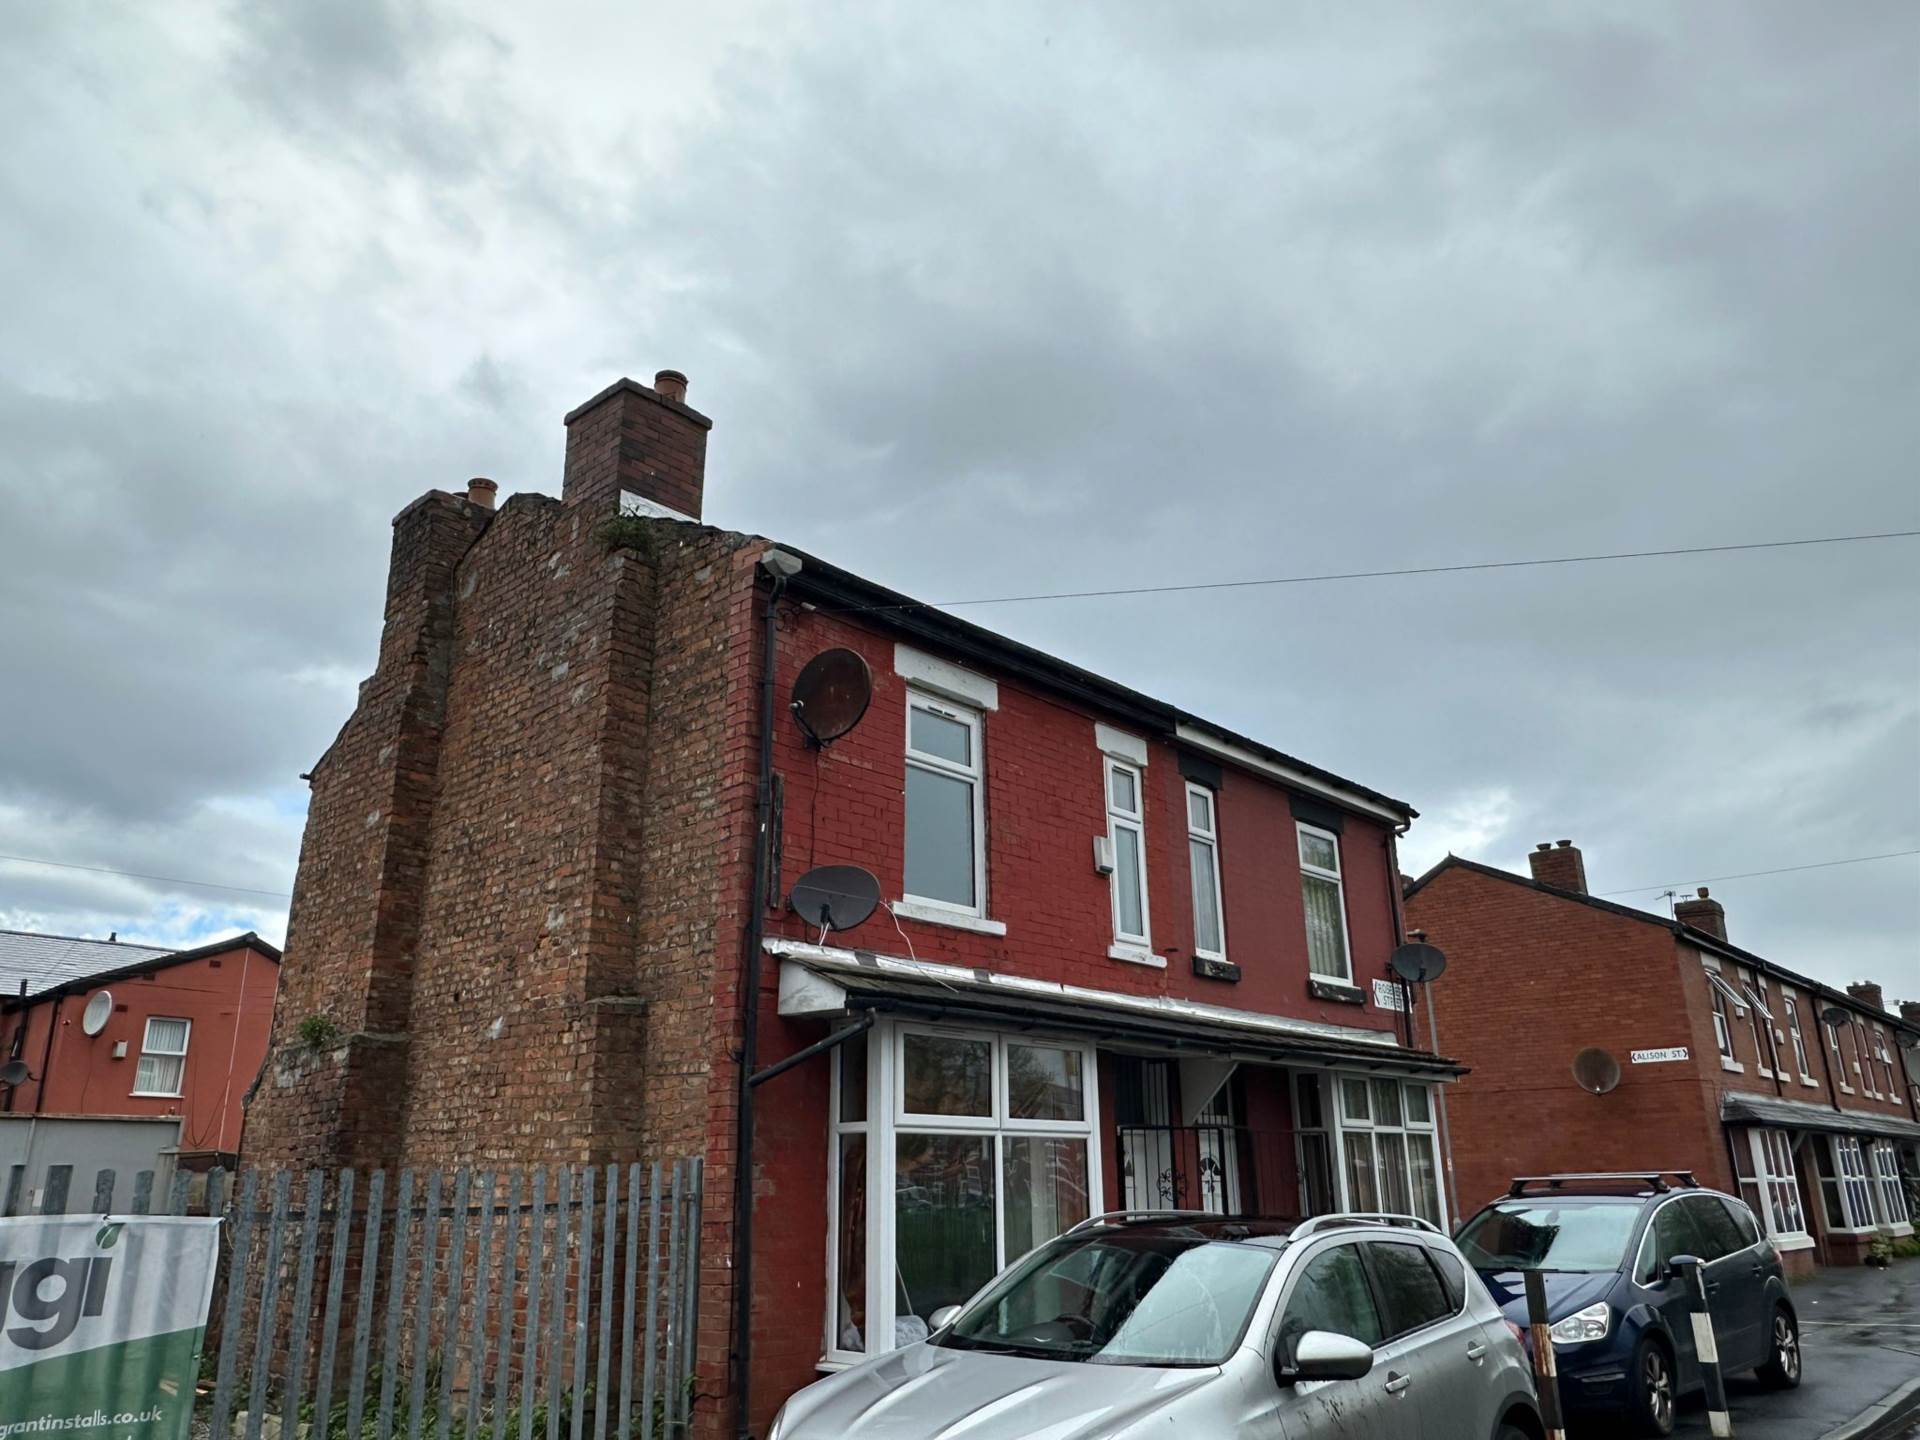 3 bed Semi-Detached House for rent in Manchester. From Sun Bright Property Ltd